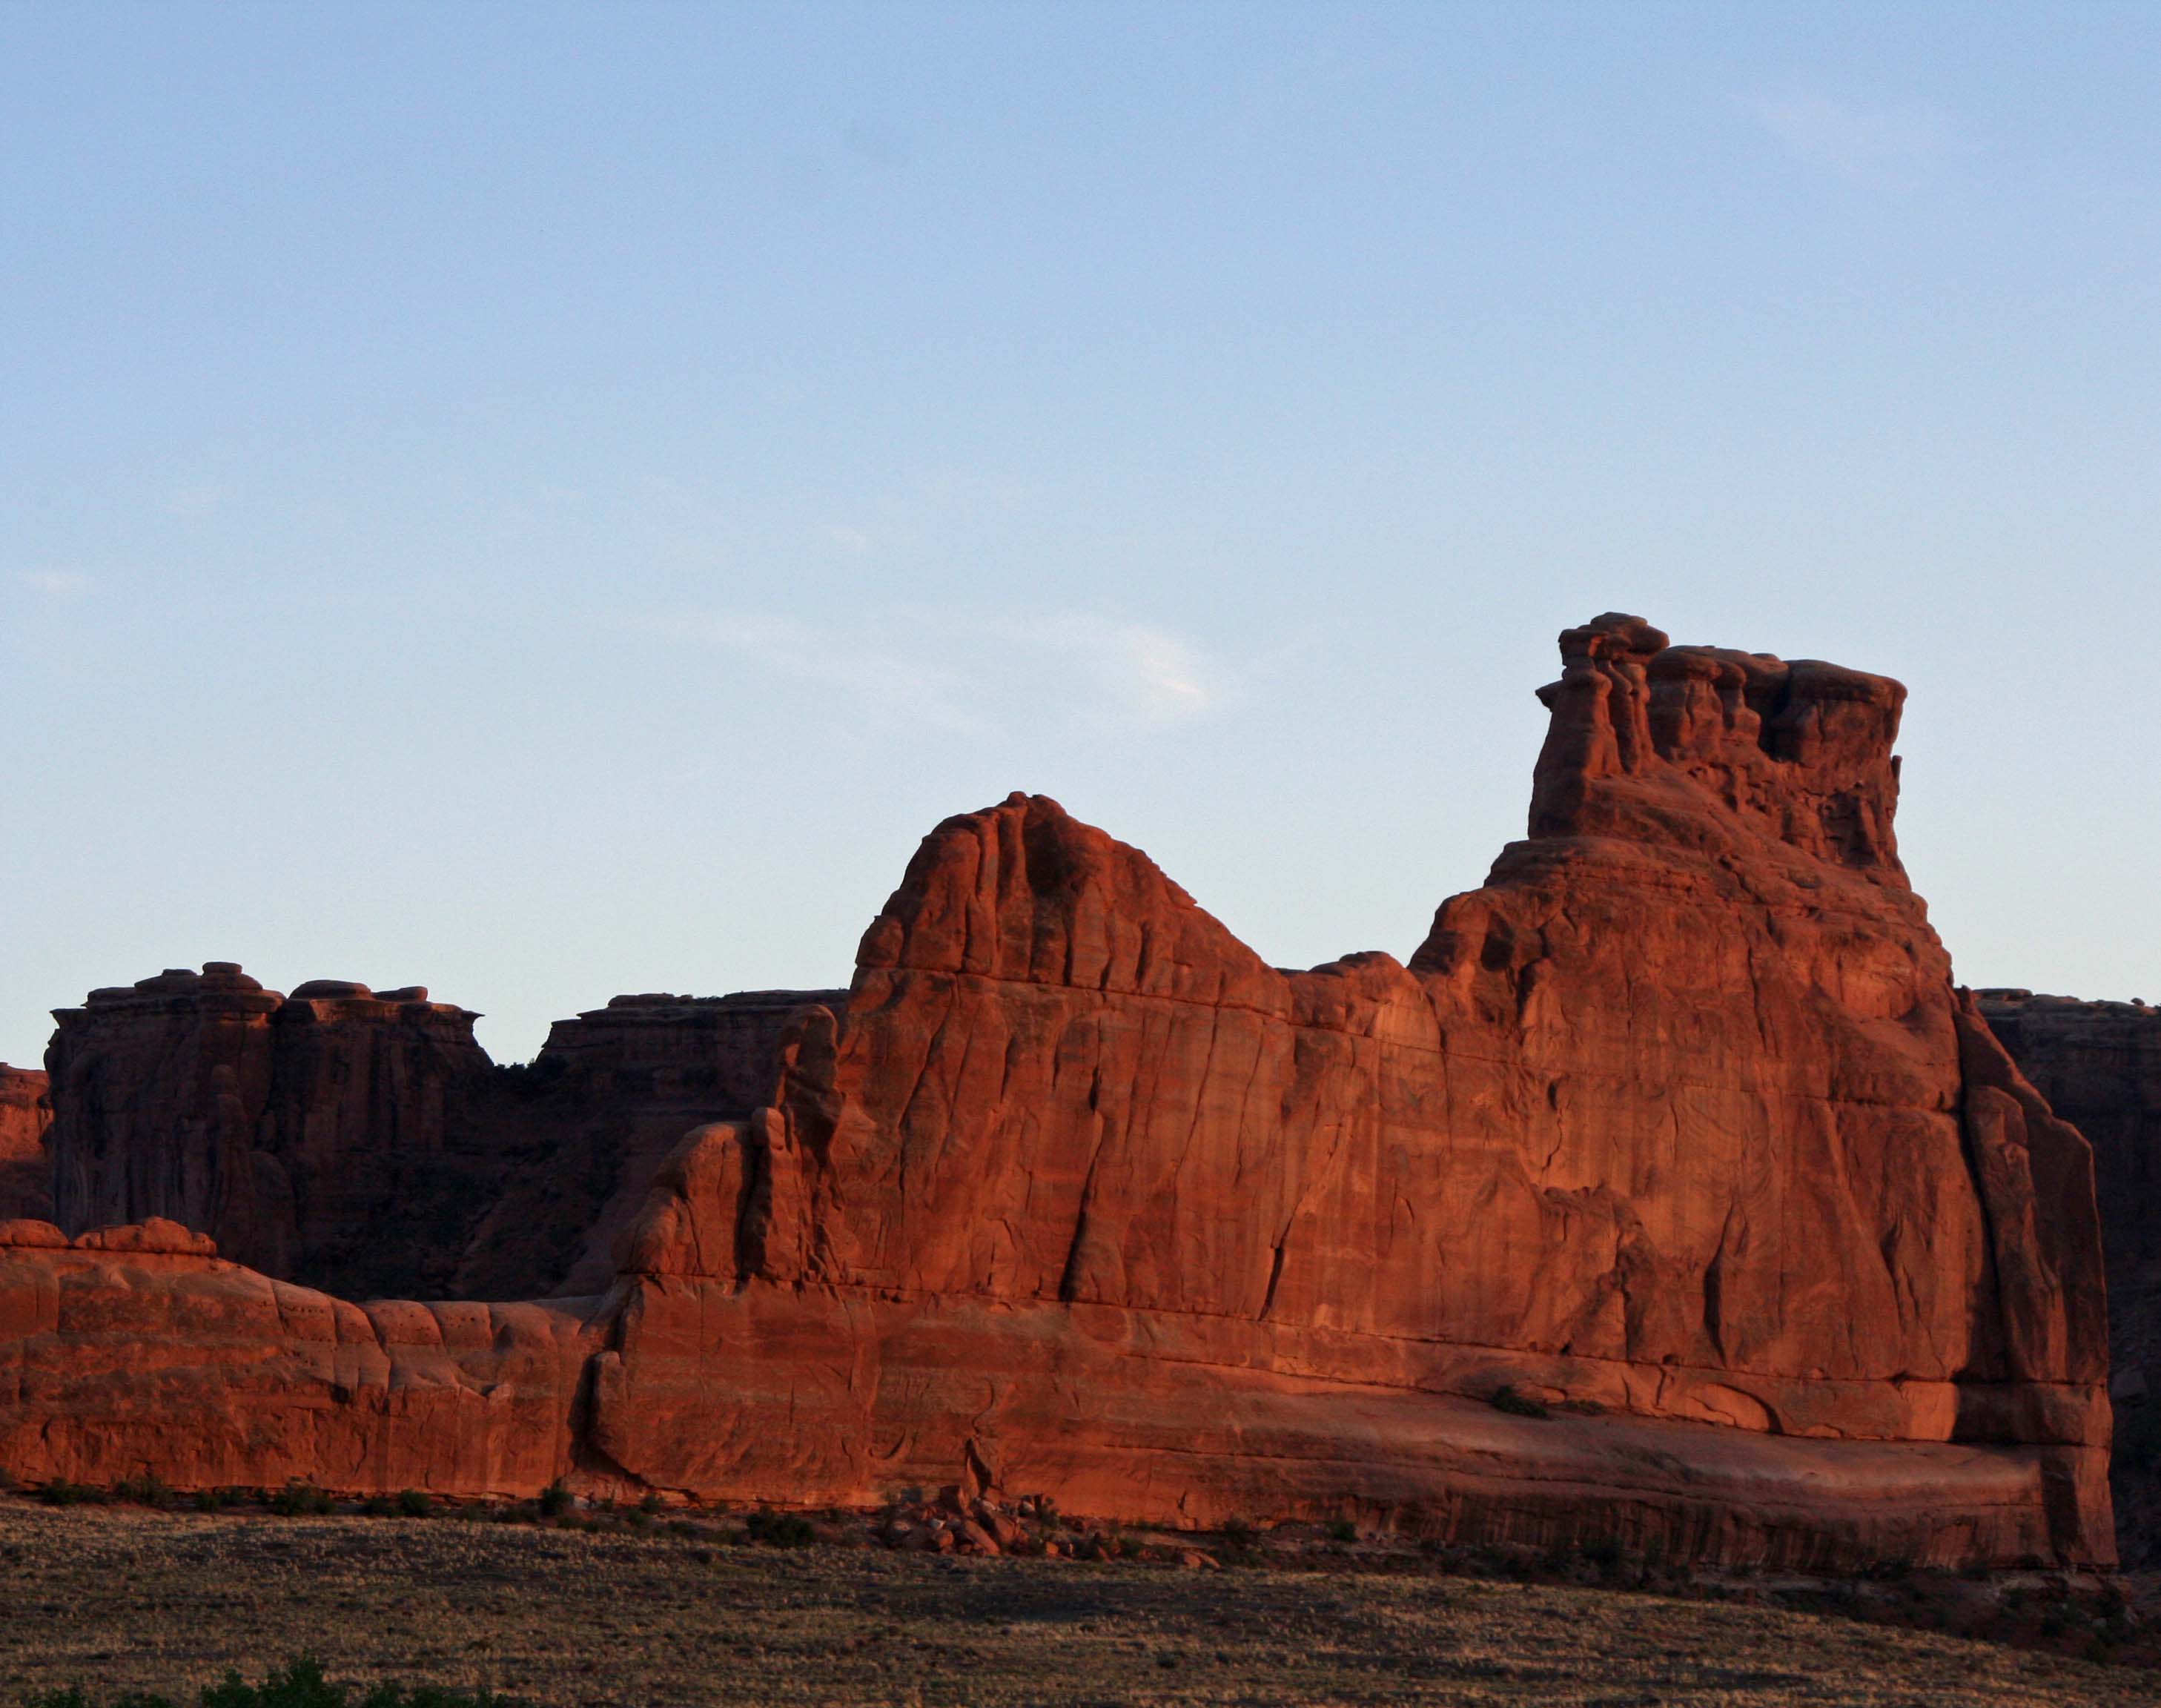 Evening sun turns a rock sculpture red in Arches National Park. Photo by Curtis Mekemson.